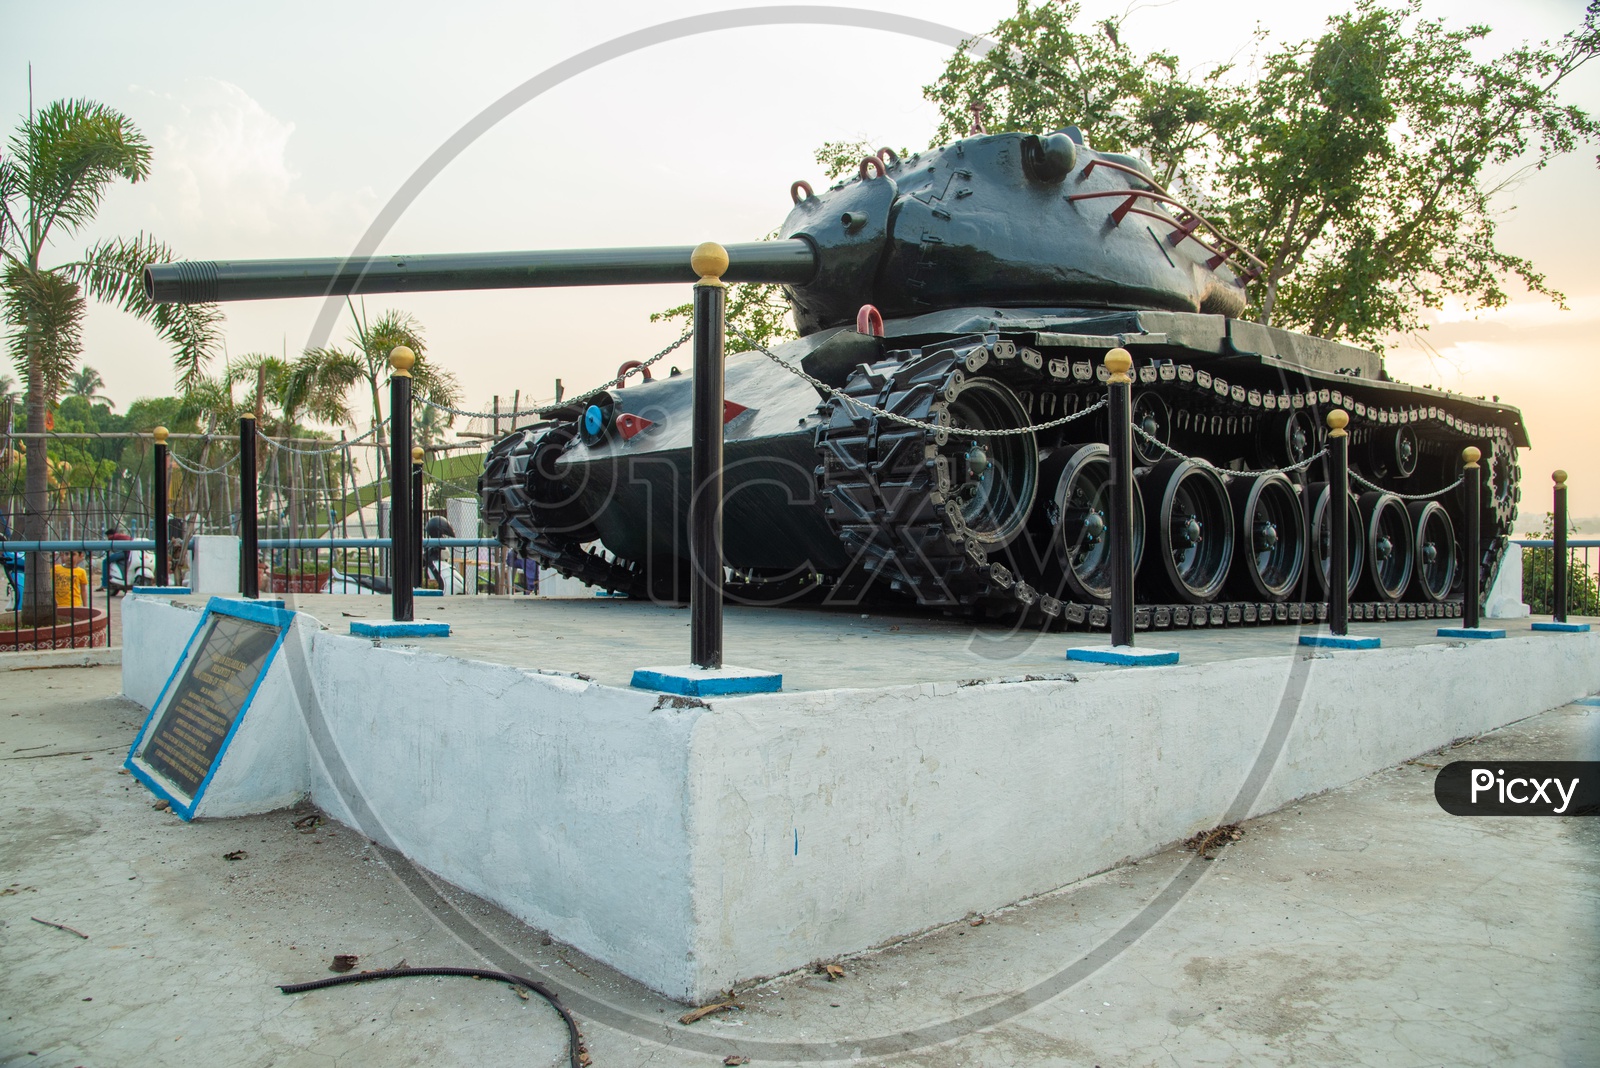 The Tank after which the Tank Bund gets its name.